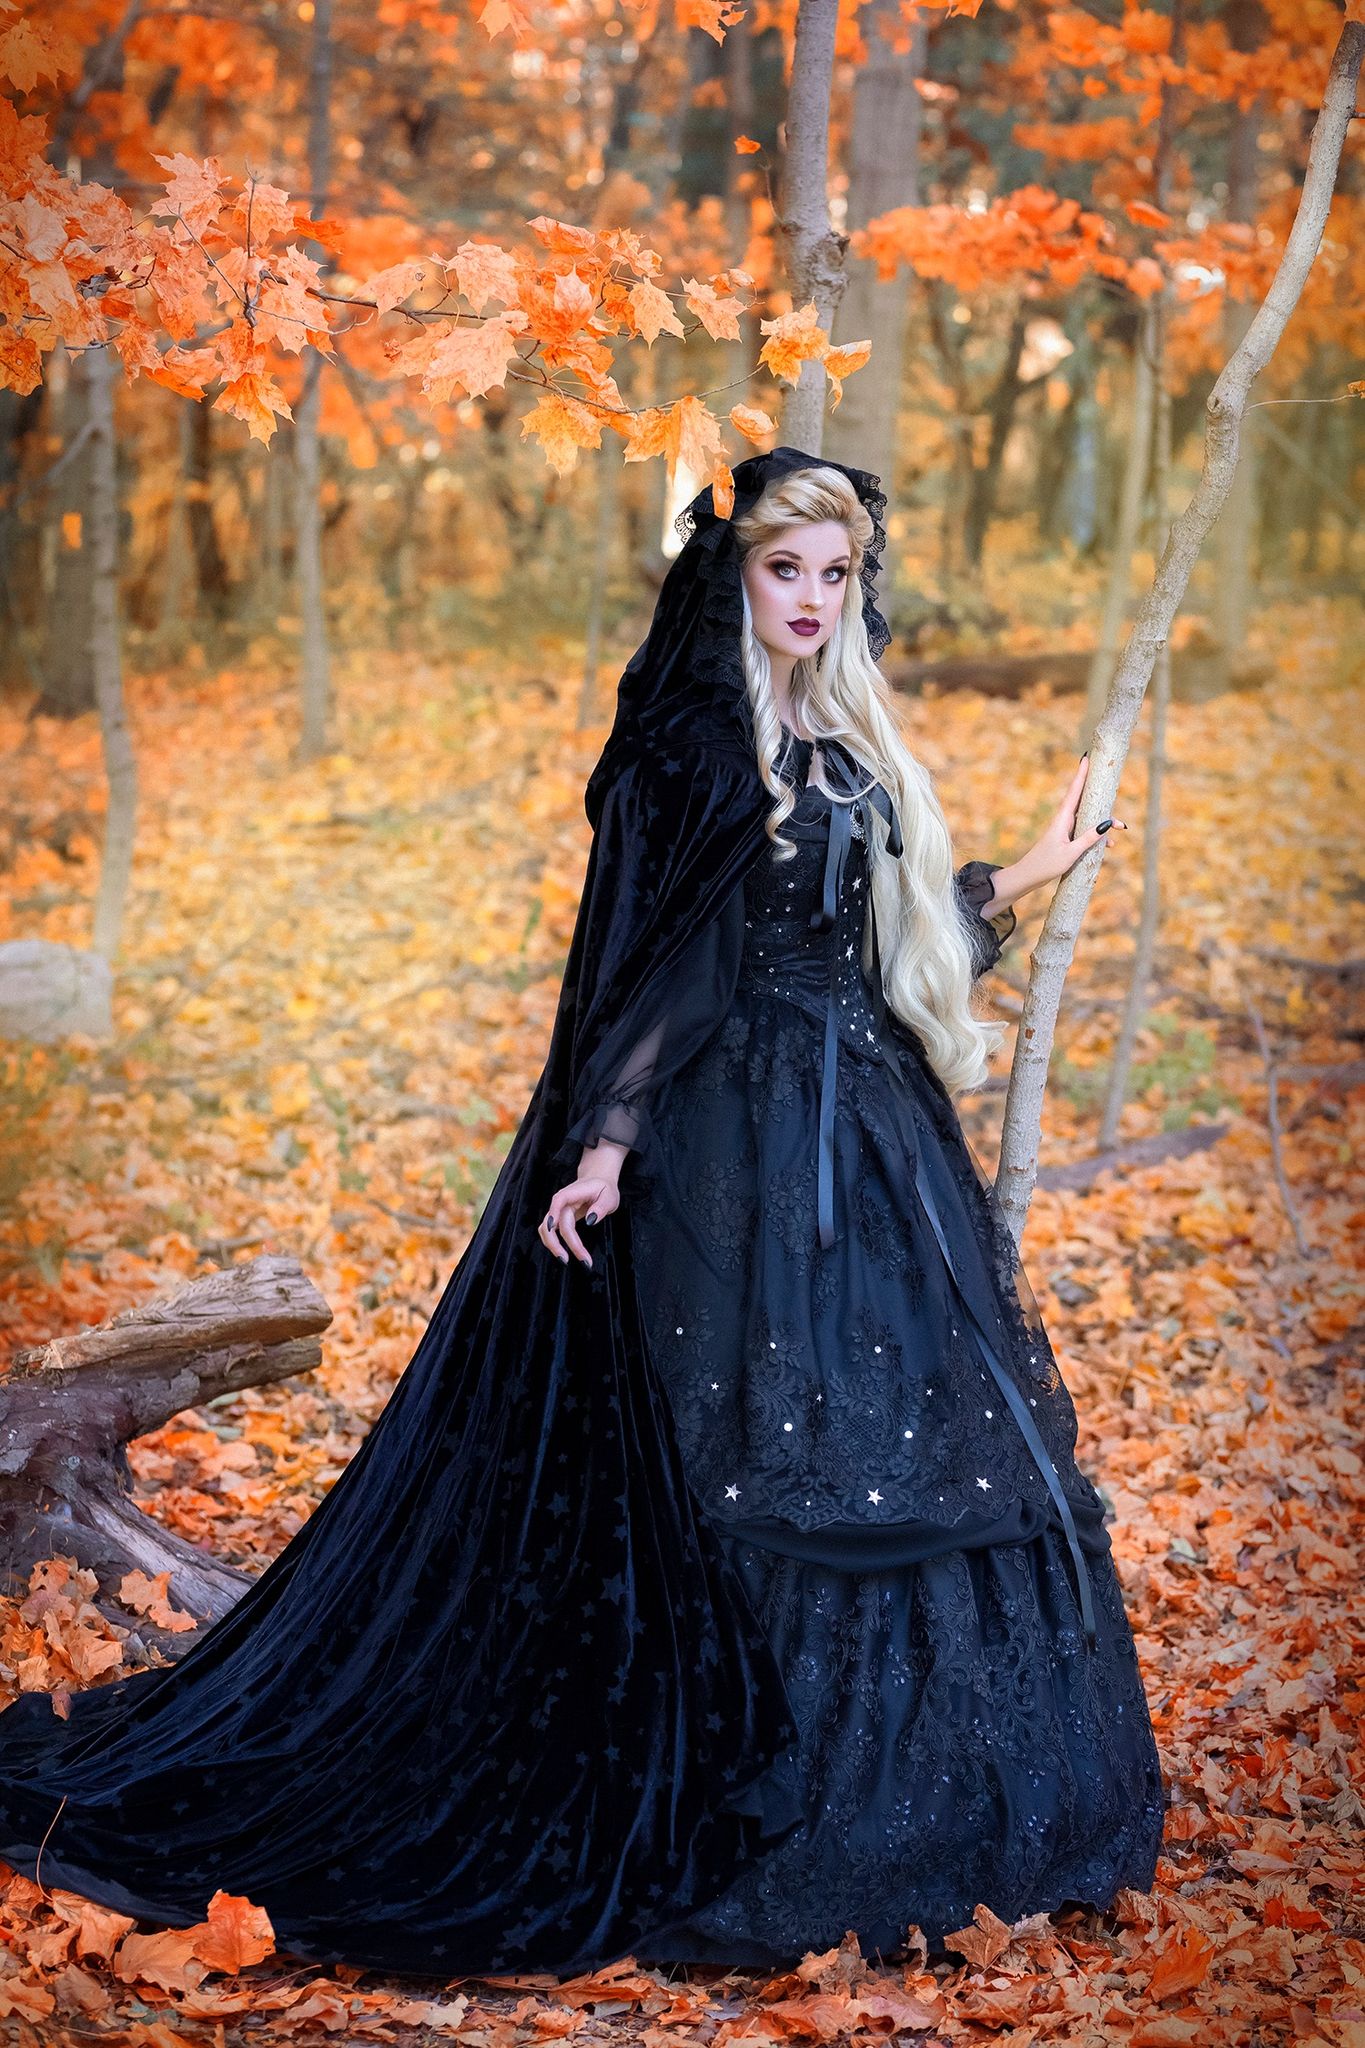 SOLD OUT Starry Night Gown  Victorian Gothic Wedding Gown New style....black lace and stars